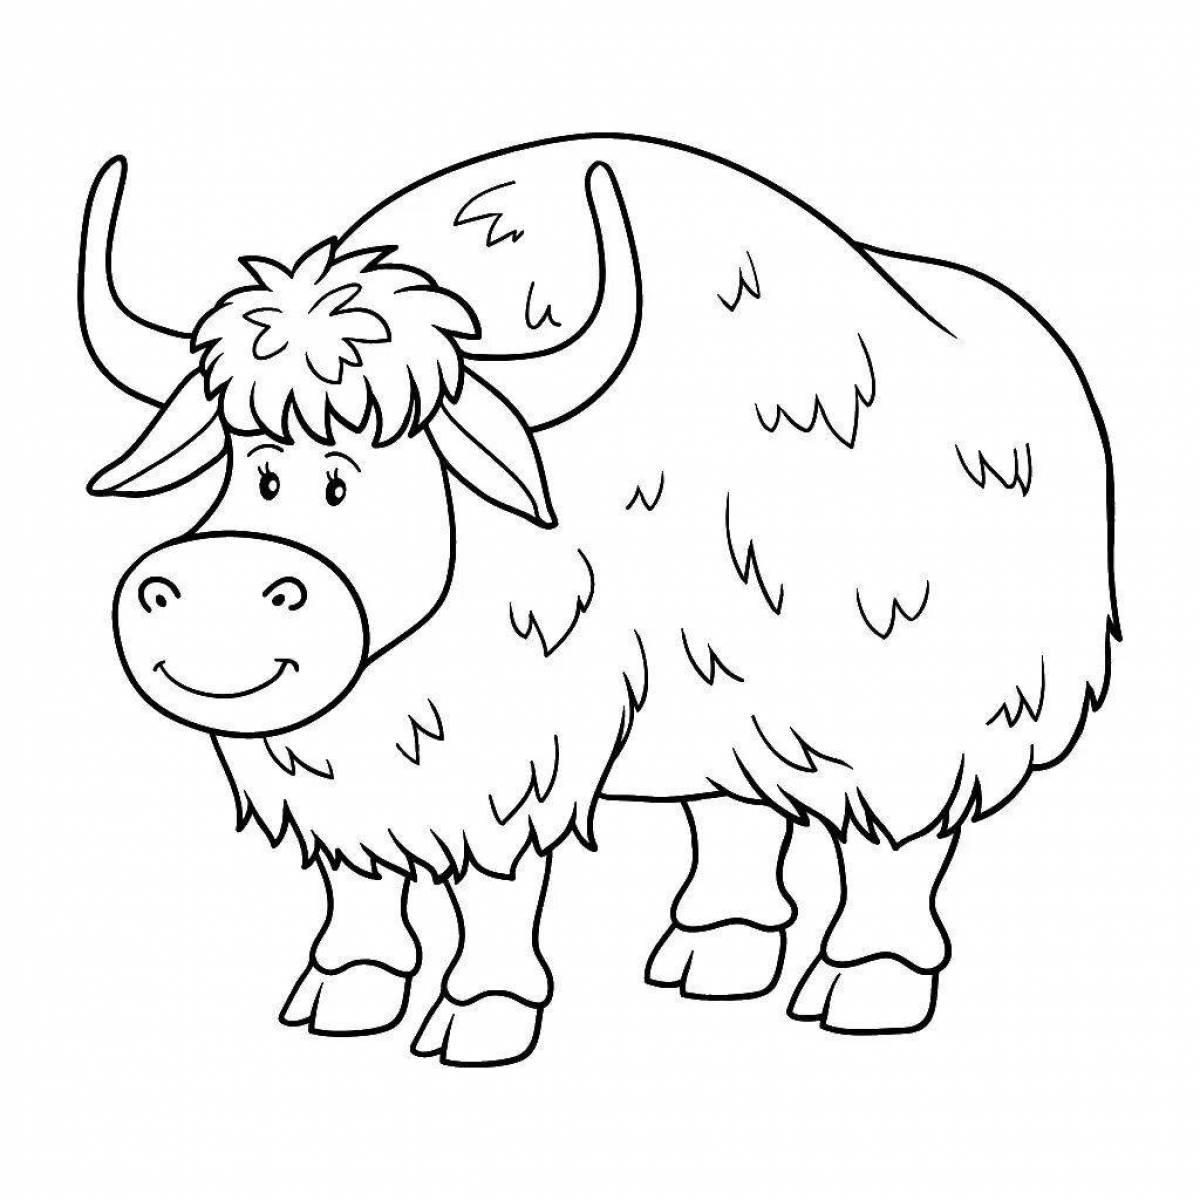 Amazing yak coloring book for kids